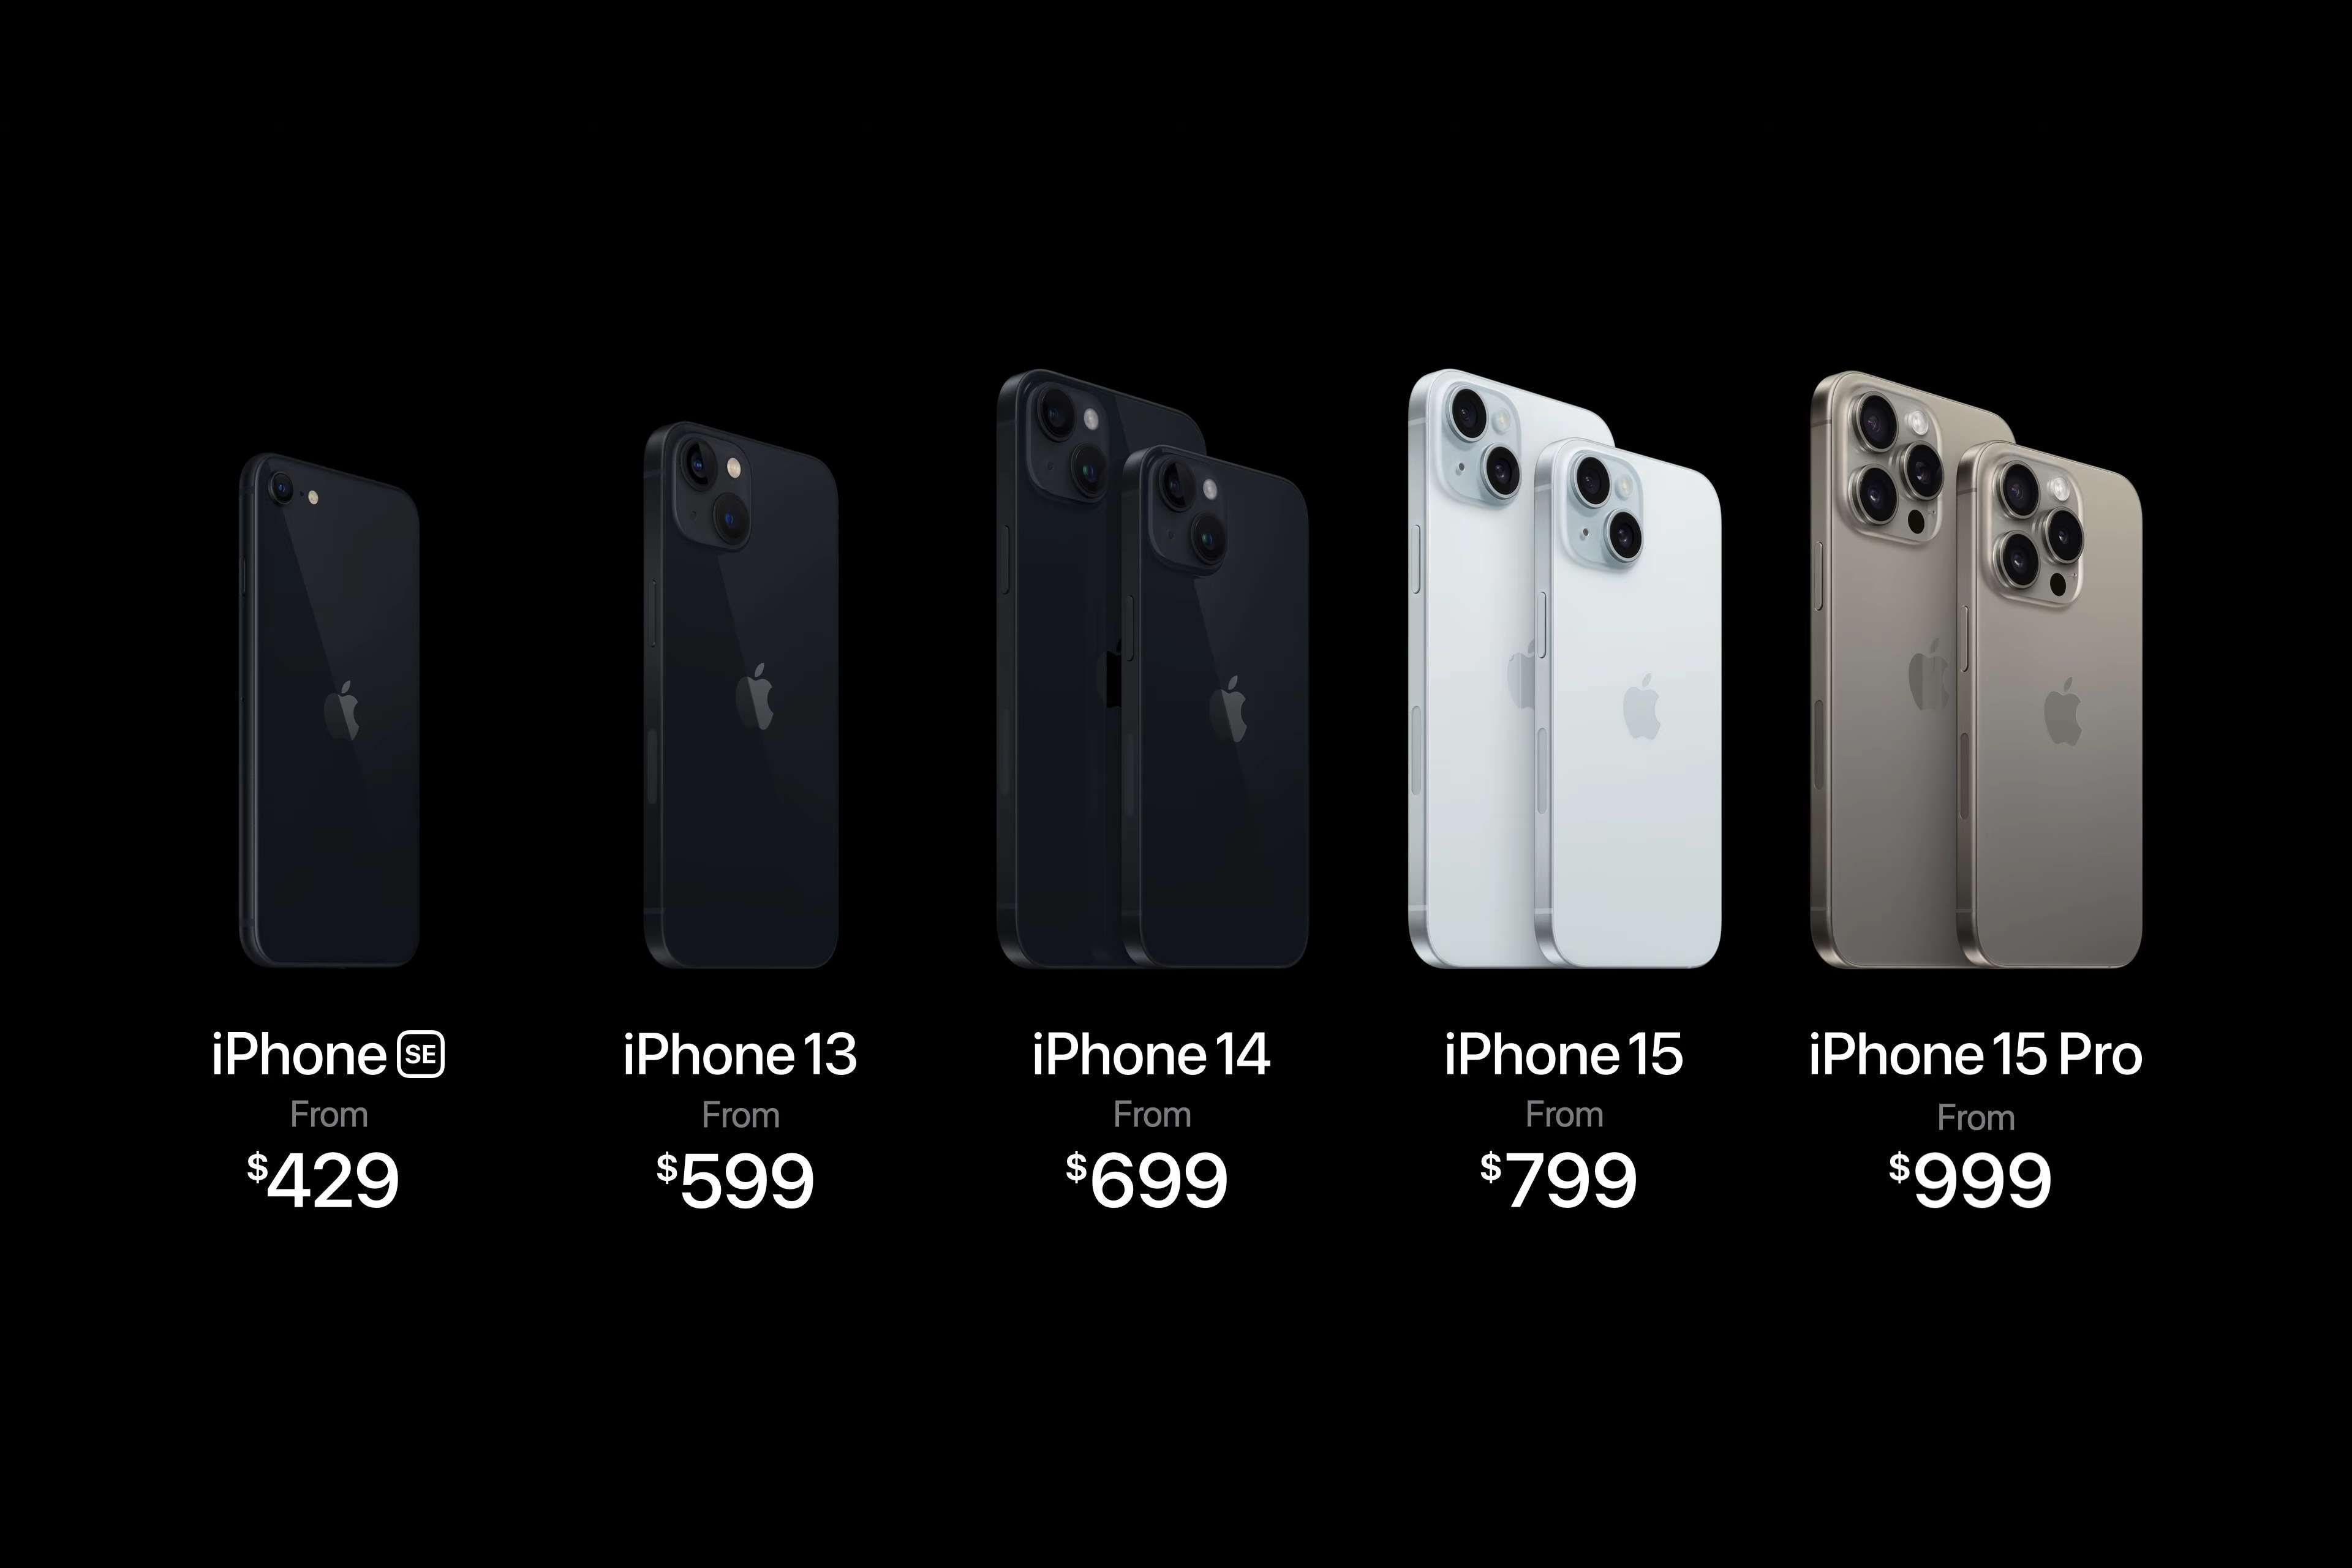 Apple kills the iPhone mini, here are the prices of older iPhones, Apple Watches